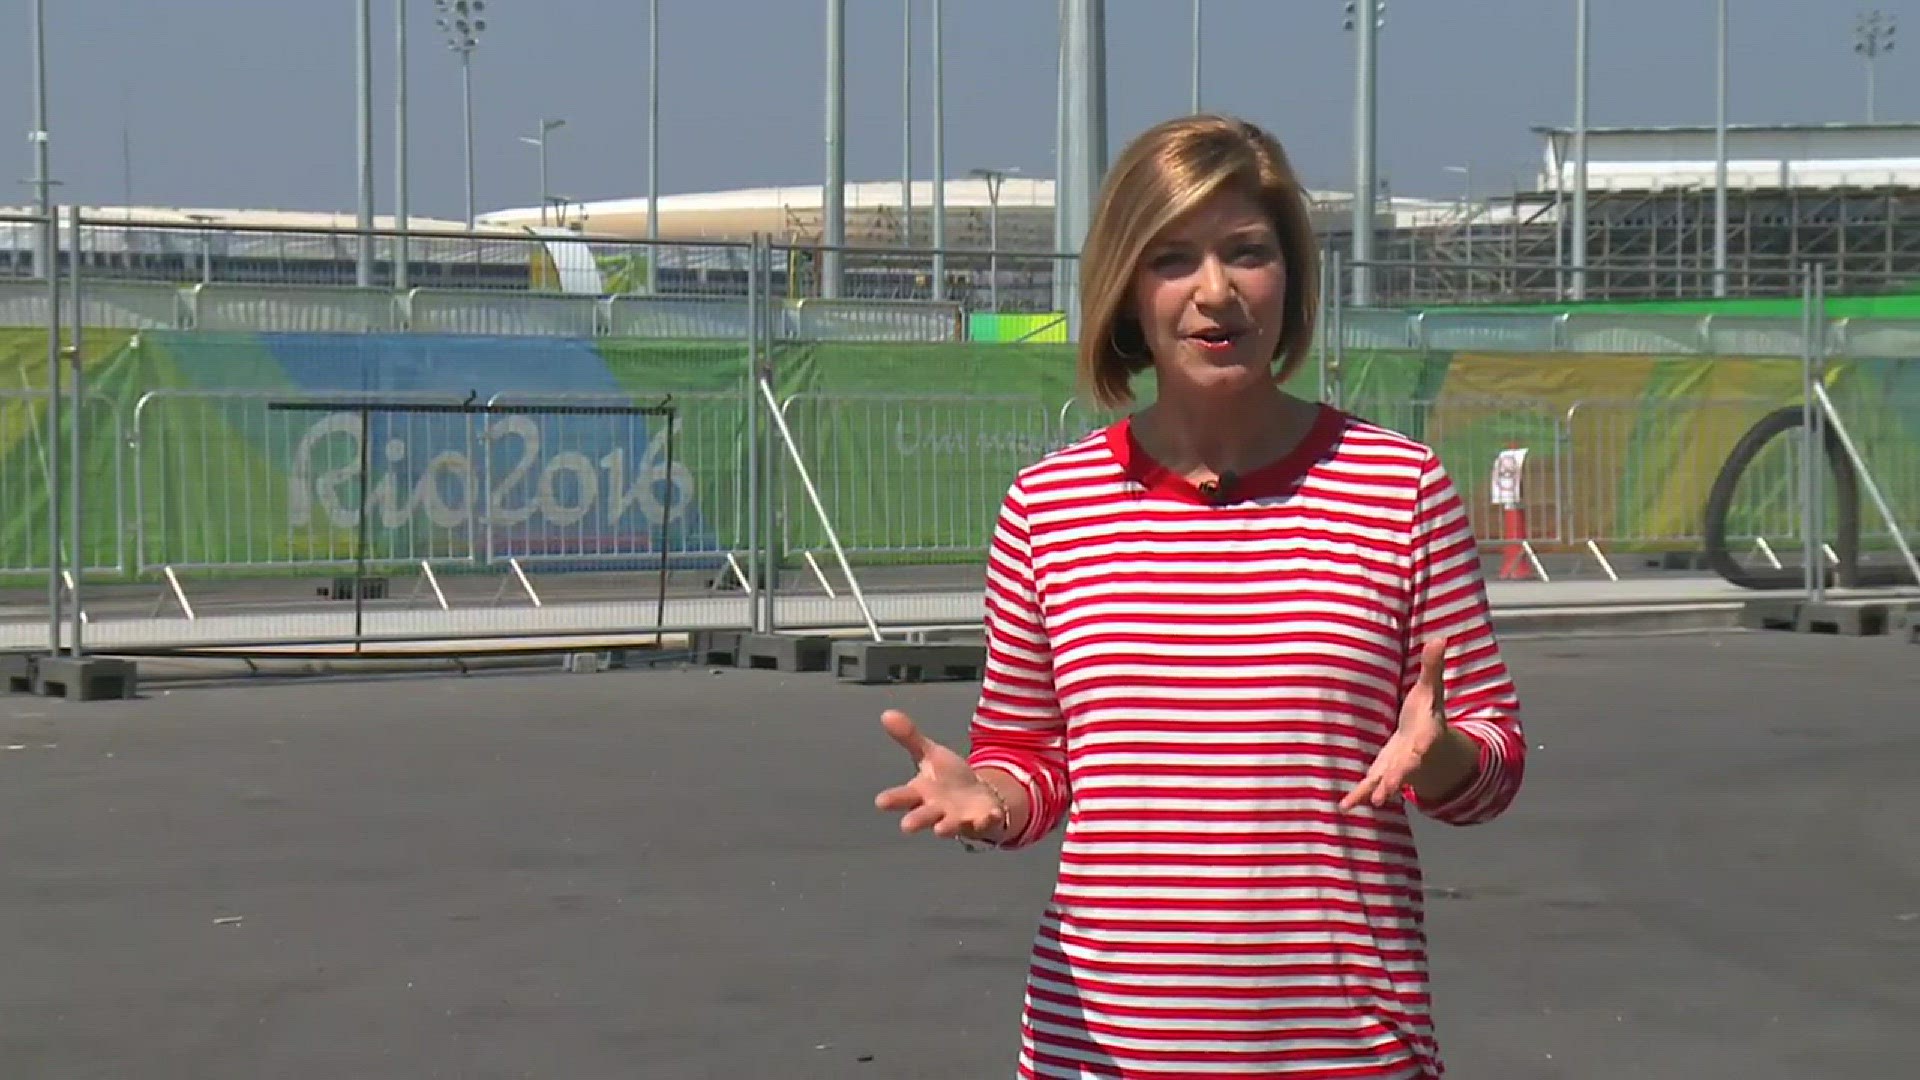 10News anchor Robin Wilhoit details the top 5 things she's learned in Rio about the Olympic host city (8/17/16 5PM)